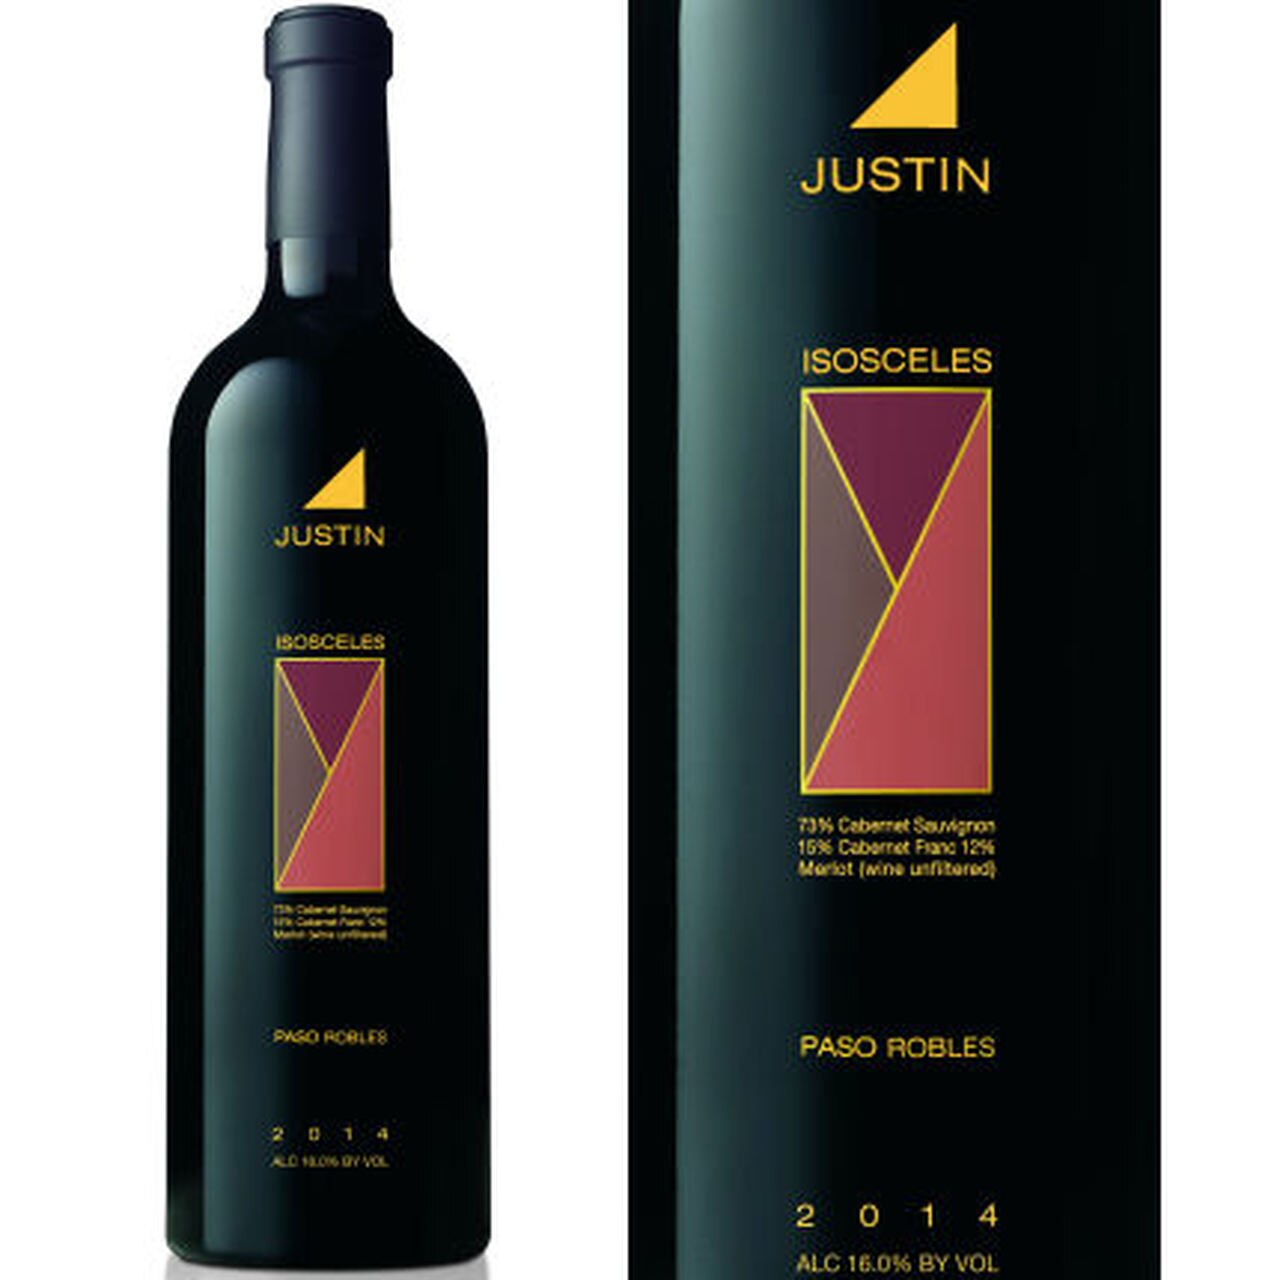 Justin Isosceles Paso Robles Red Blend 2014 375ml Half Bottle Rated 93WE.